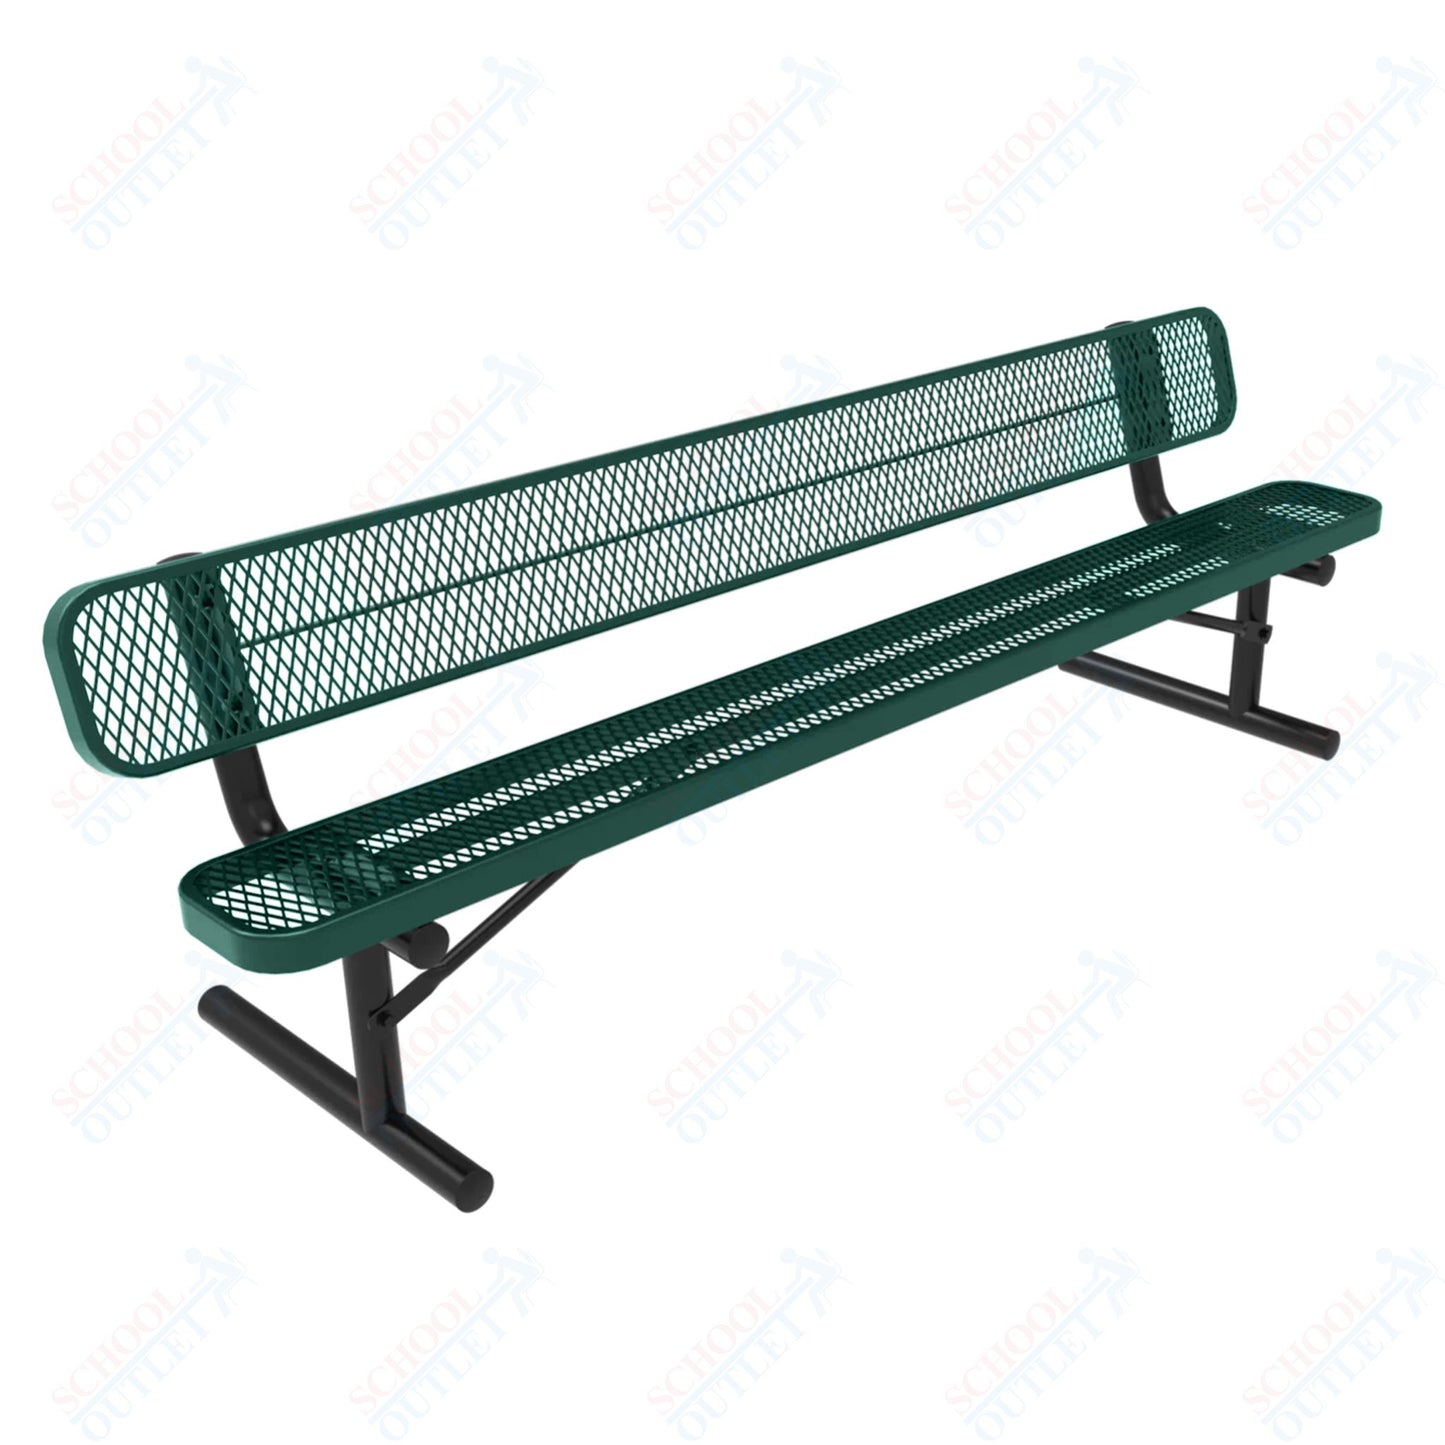 MyTcoat - Standard Portable Outdoor Bench with Back 8' L (MYT-BRT08-18)